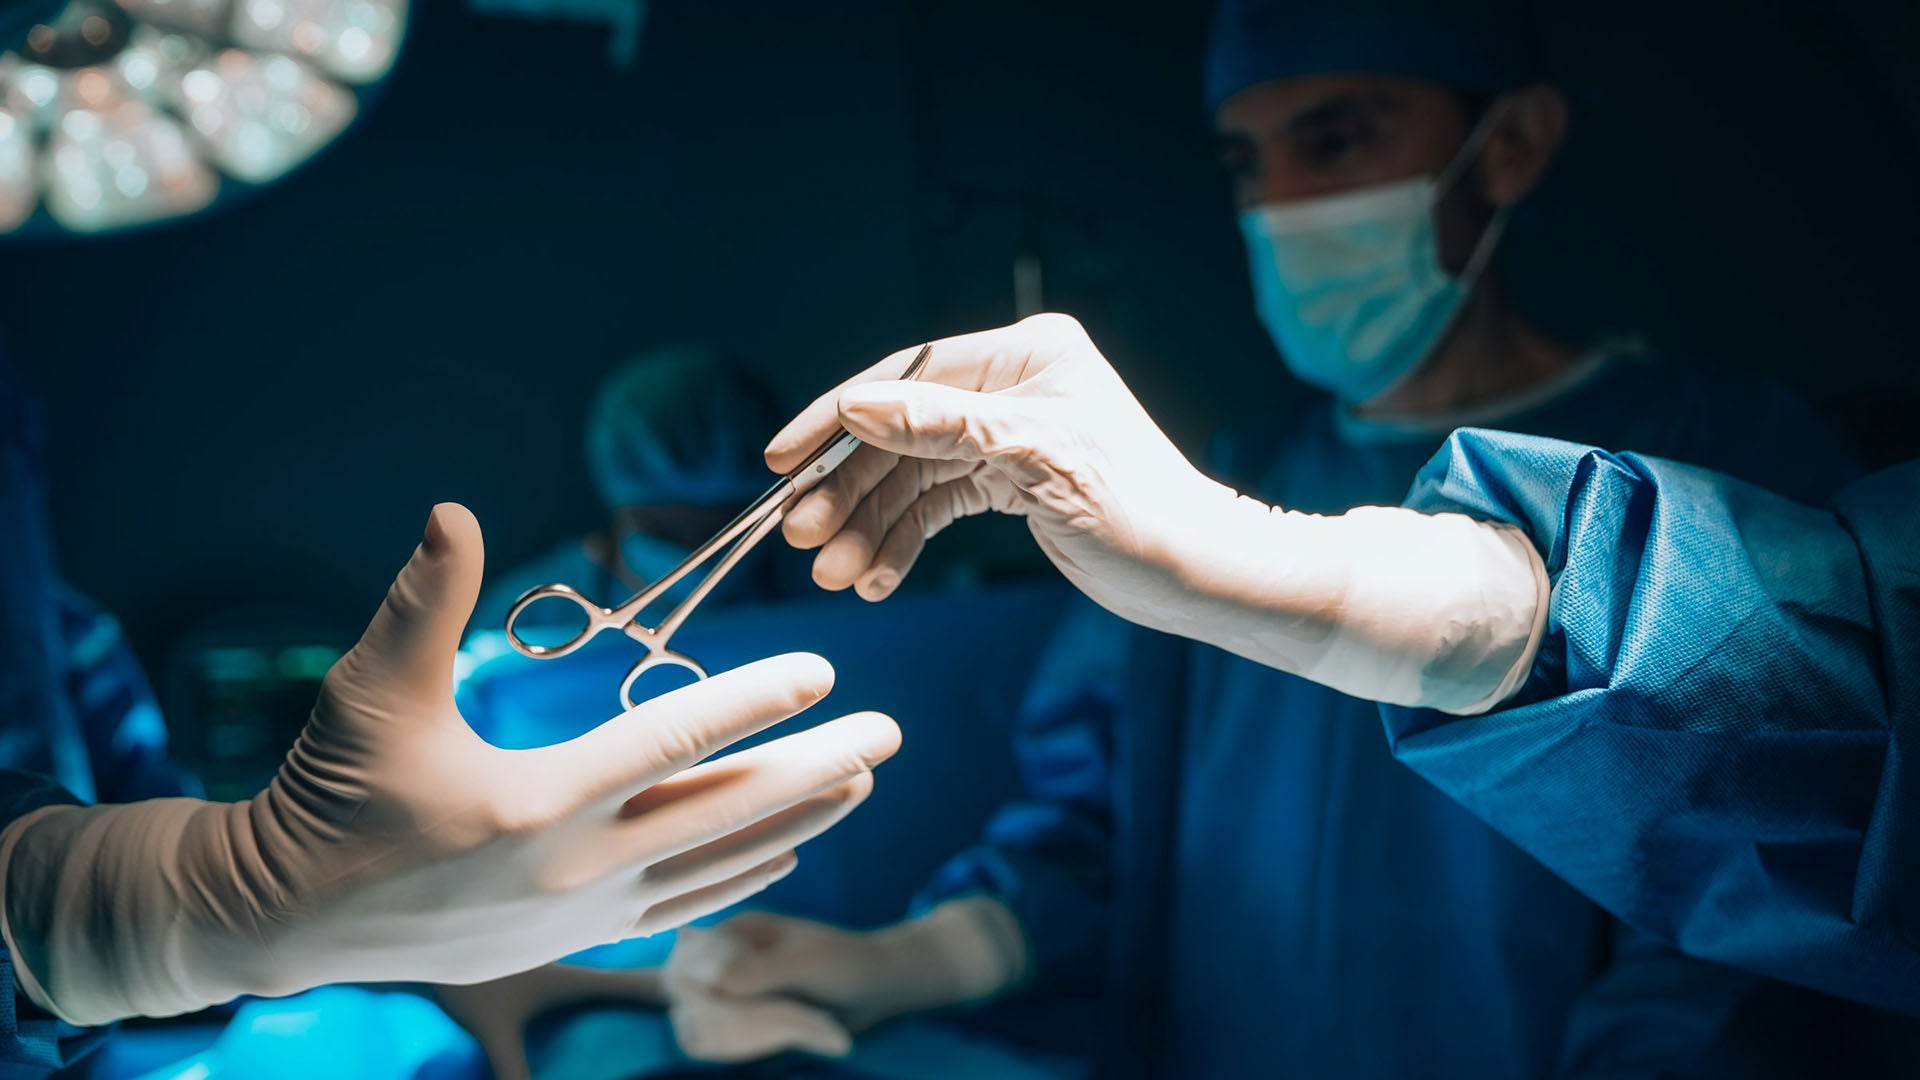 A medical team wearing PPE and passing a sterile surgical scissors to the surgeon.